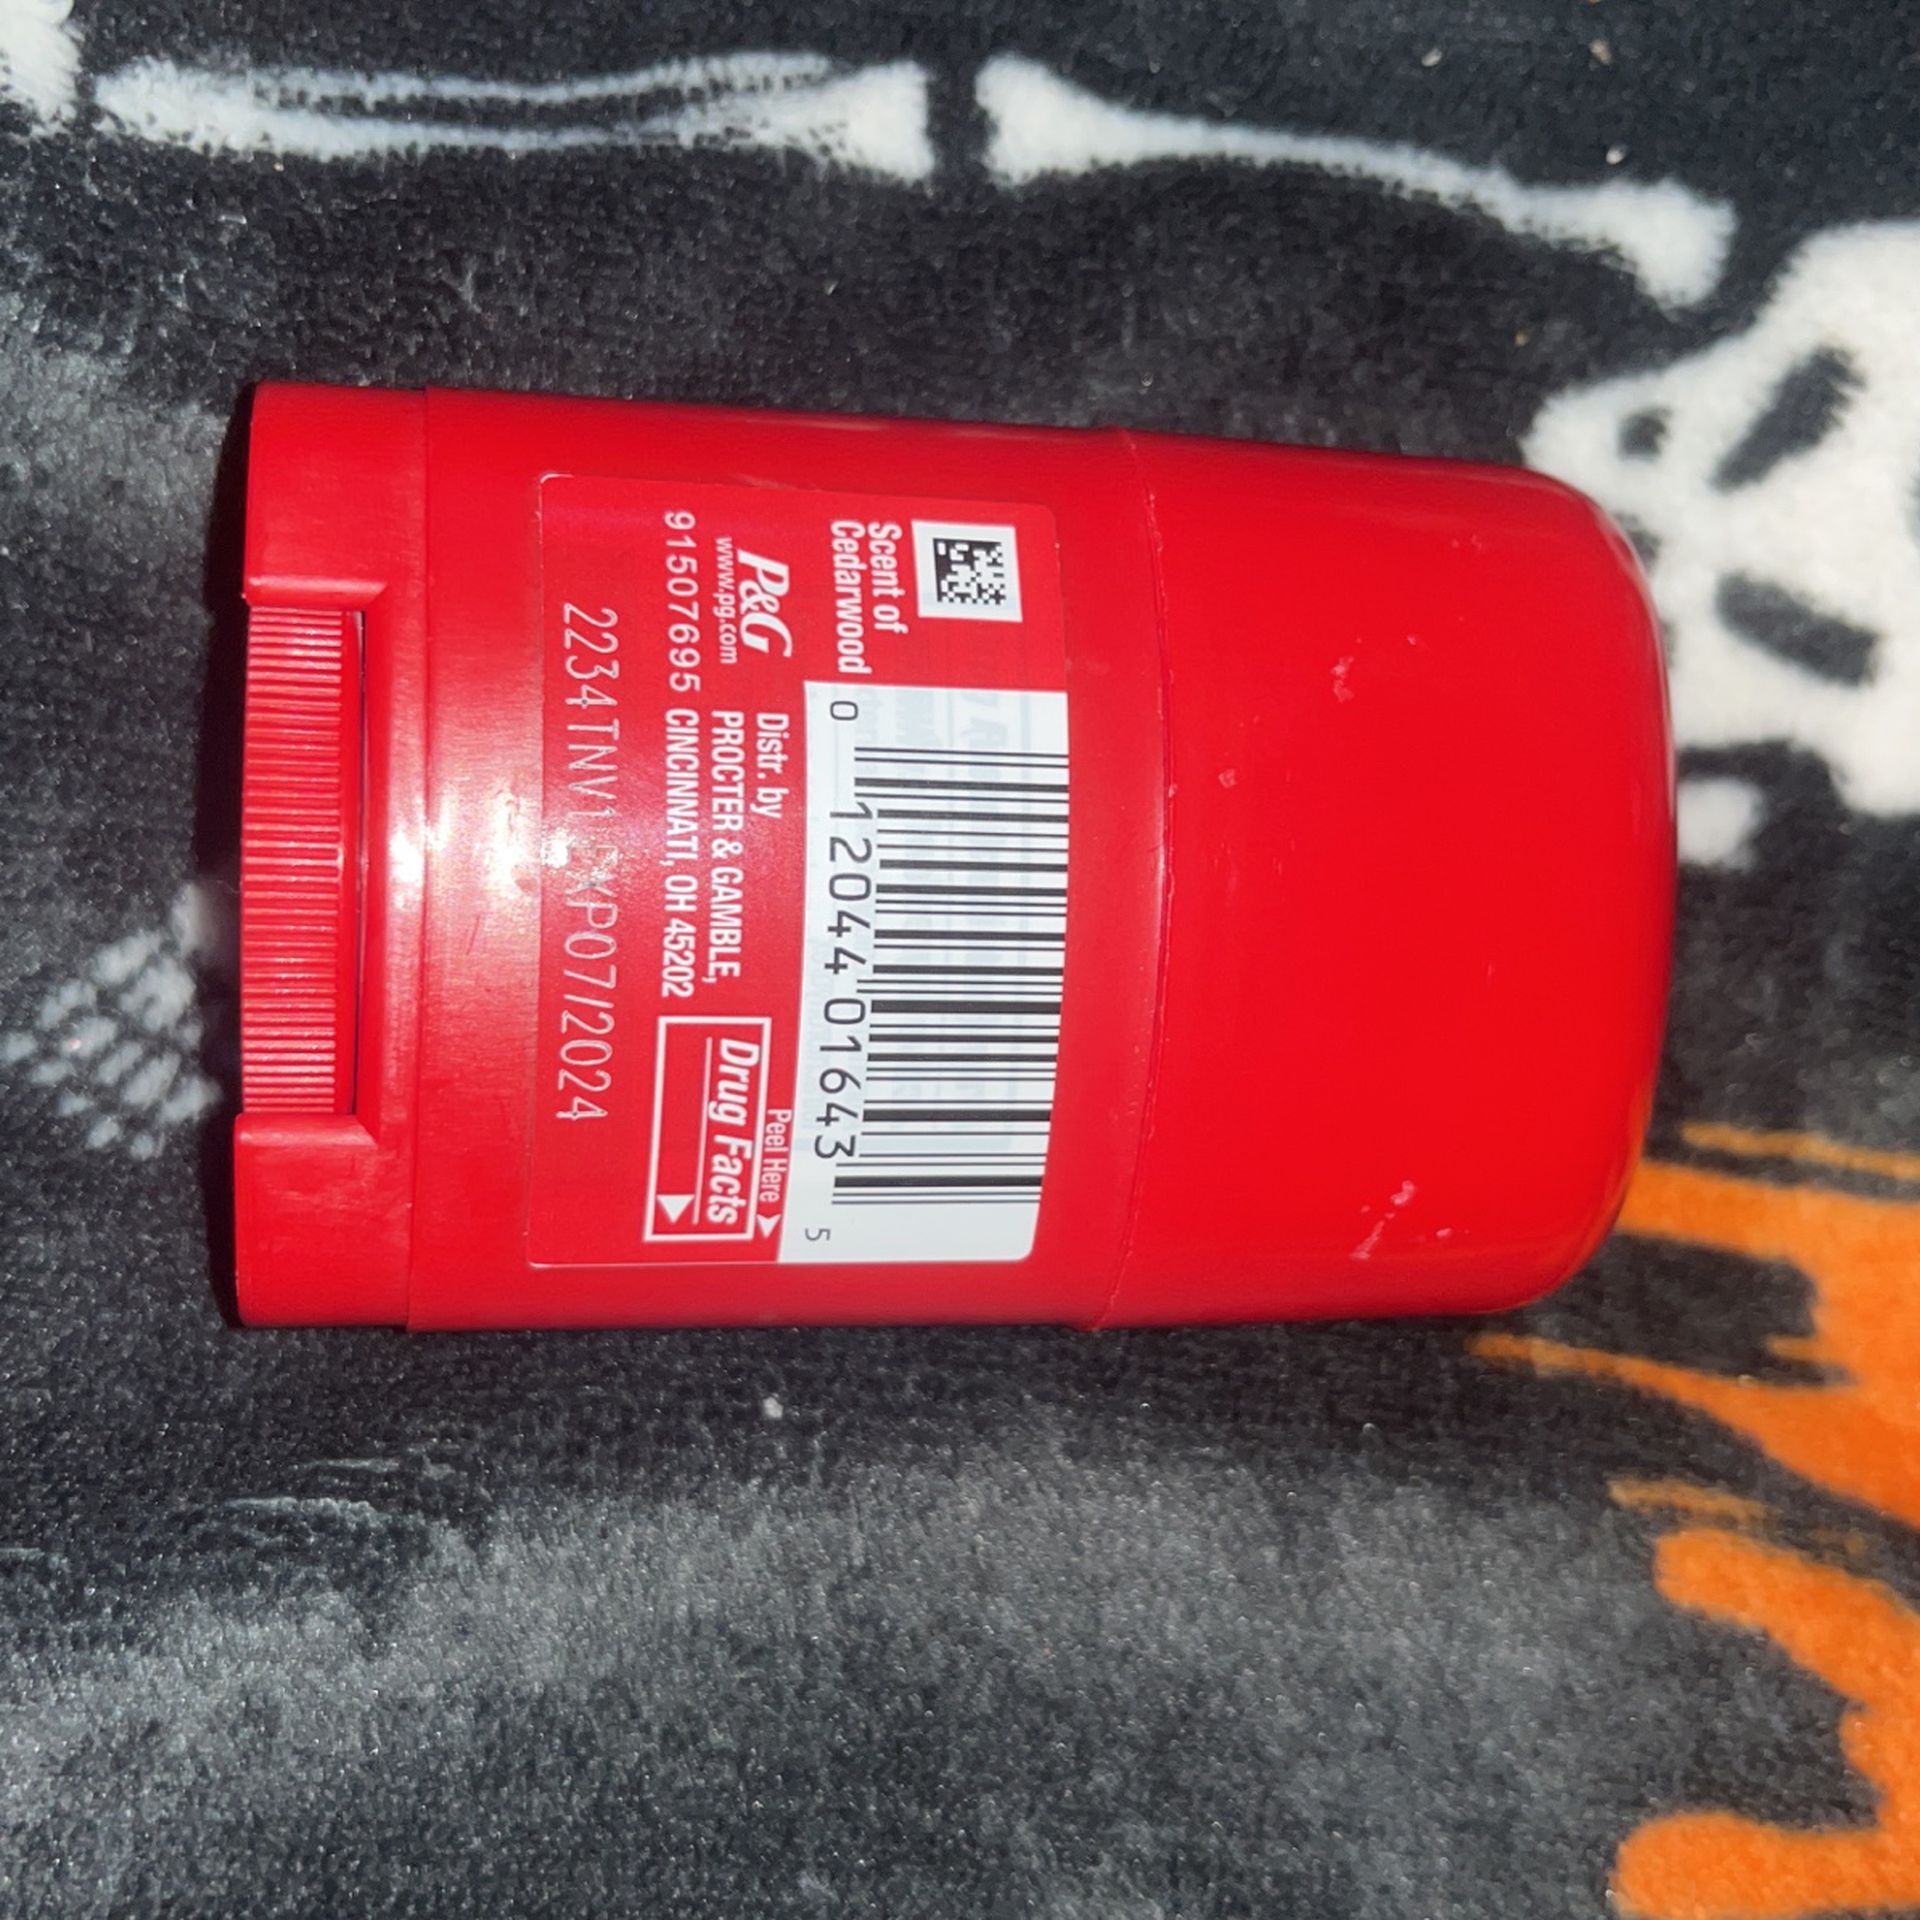 Old Spice Swagger Deodorant 